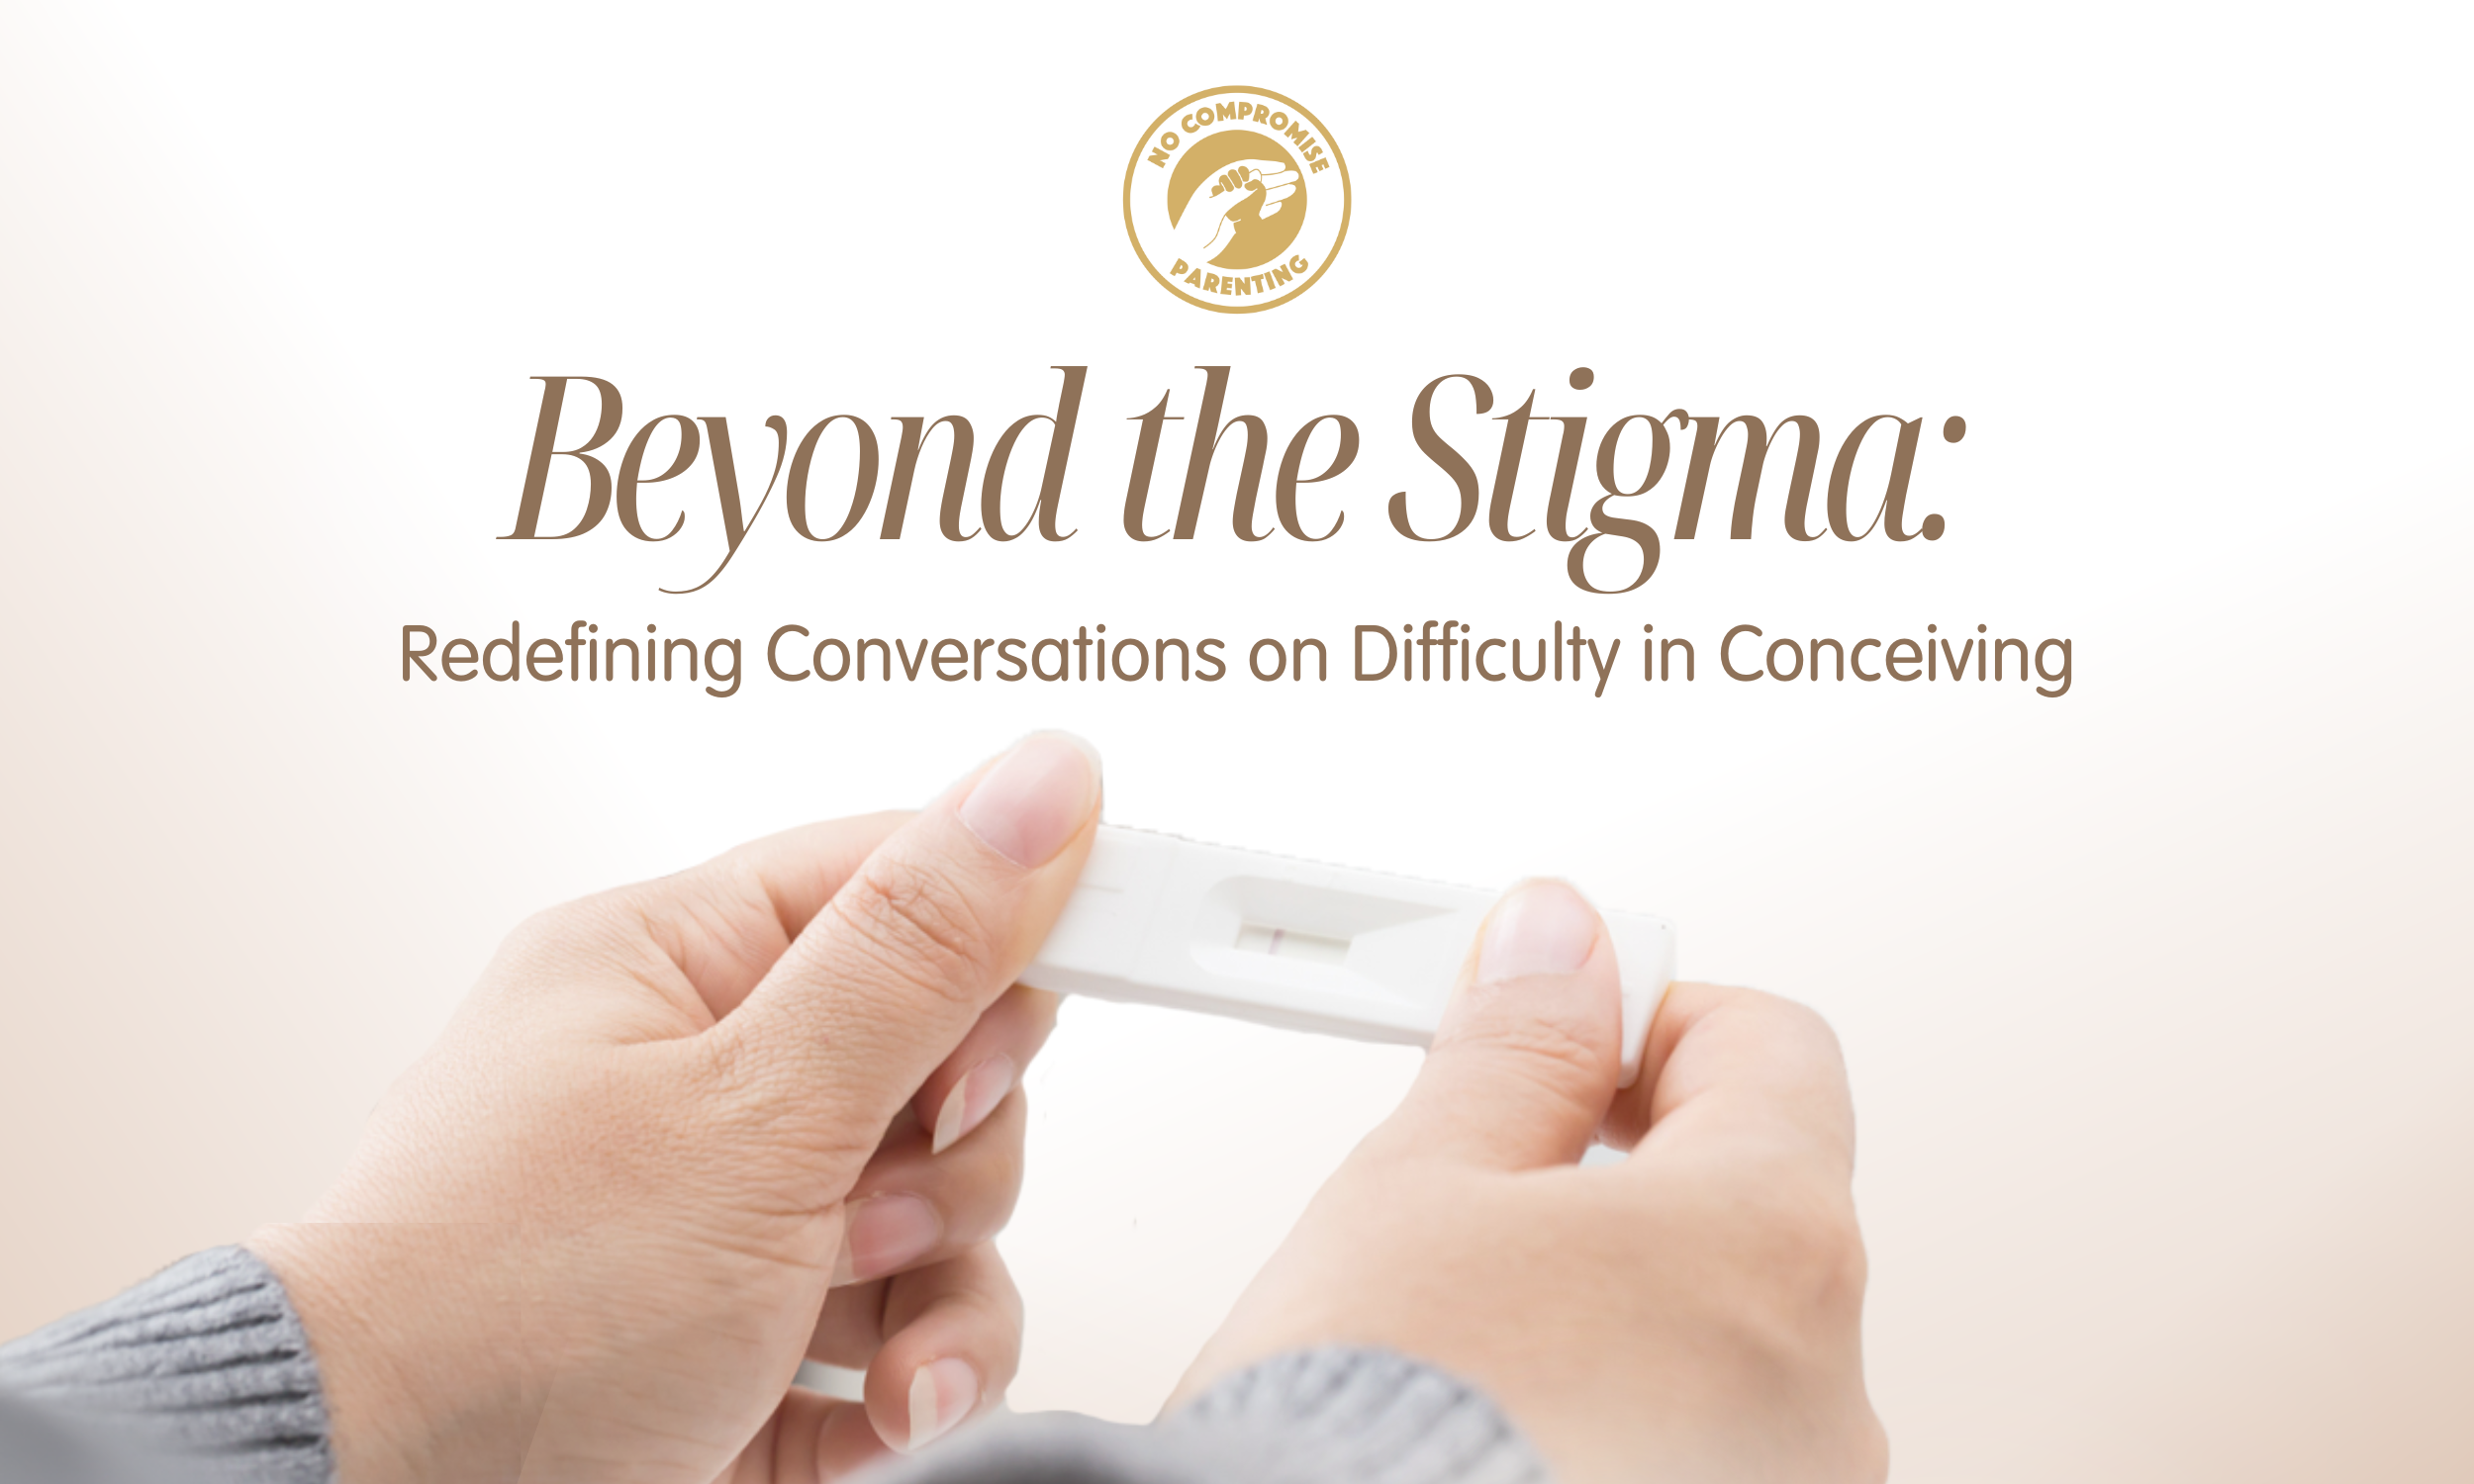 Beyond the Stigma: Redefining Conversations on the Difficulty in Conceiving